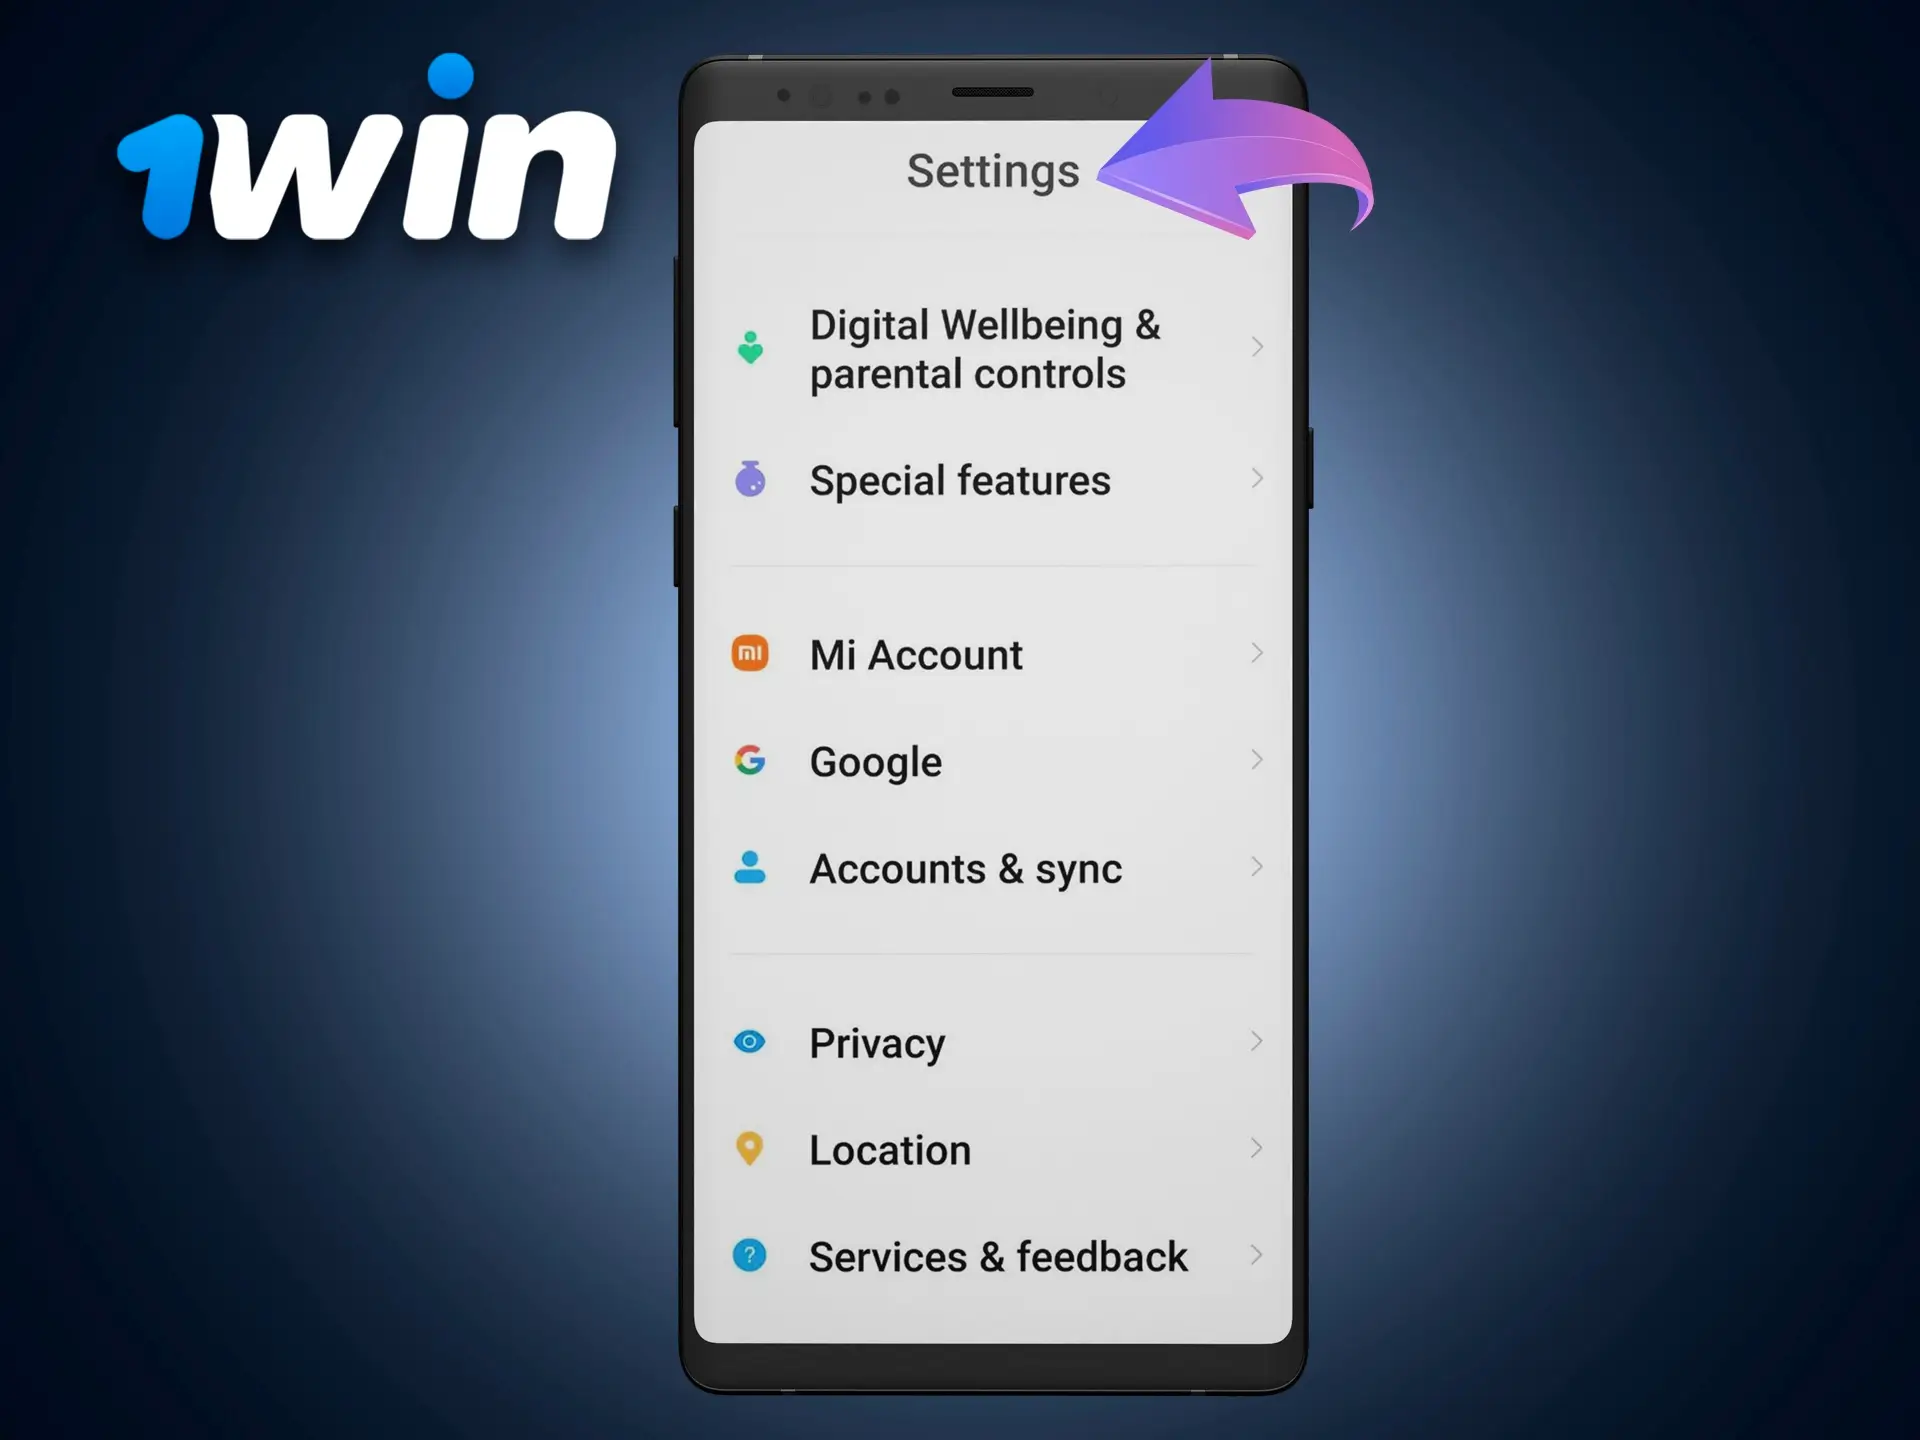 Prepare and configure your device to install the 1Win app.